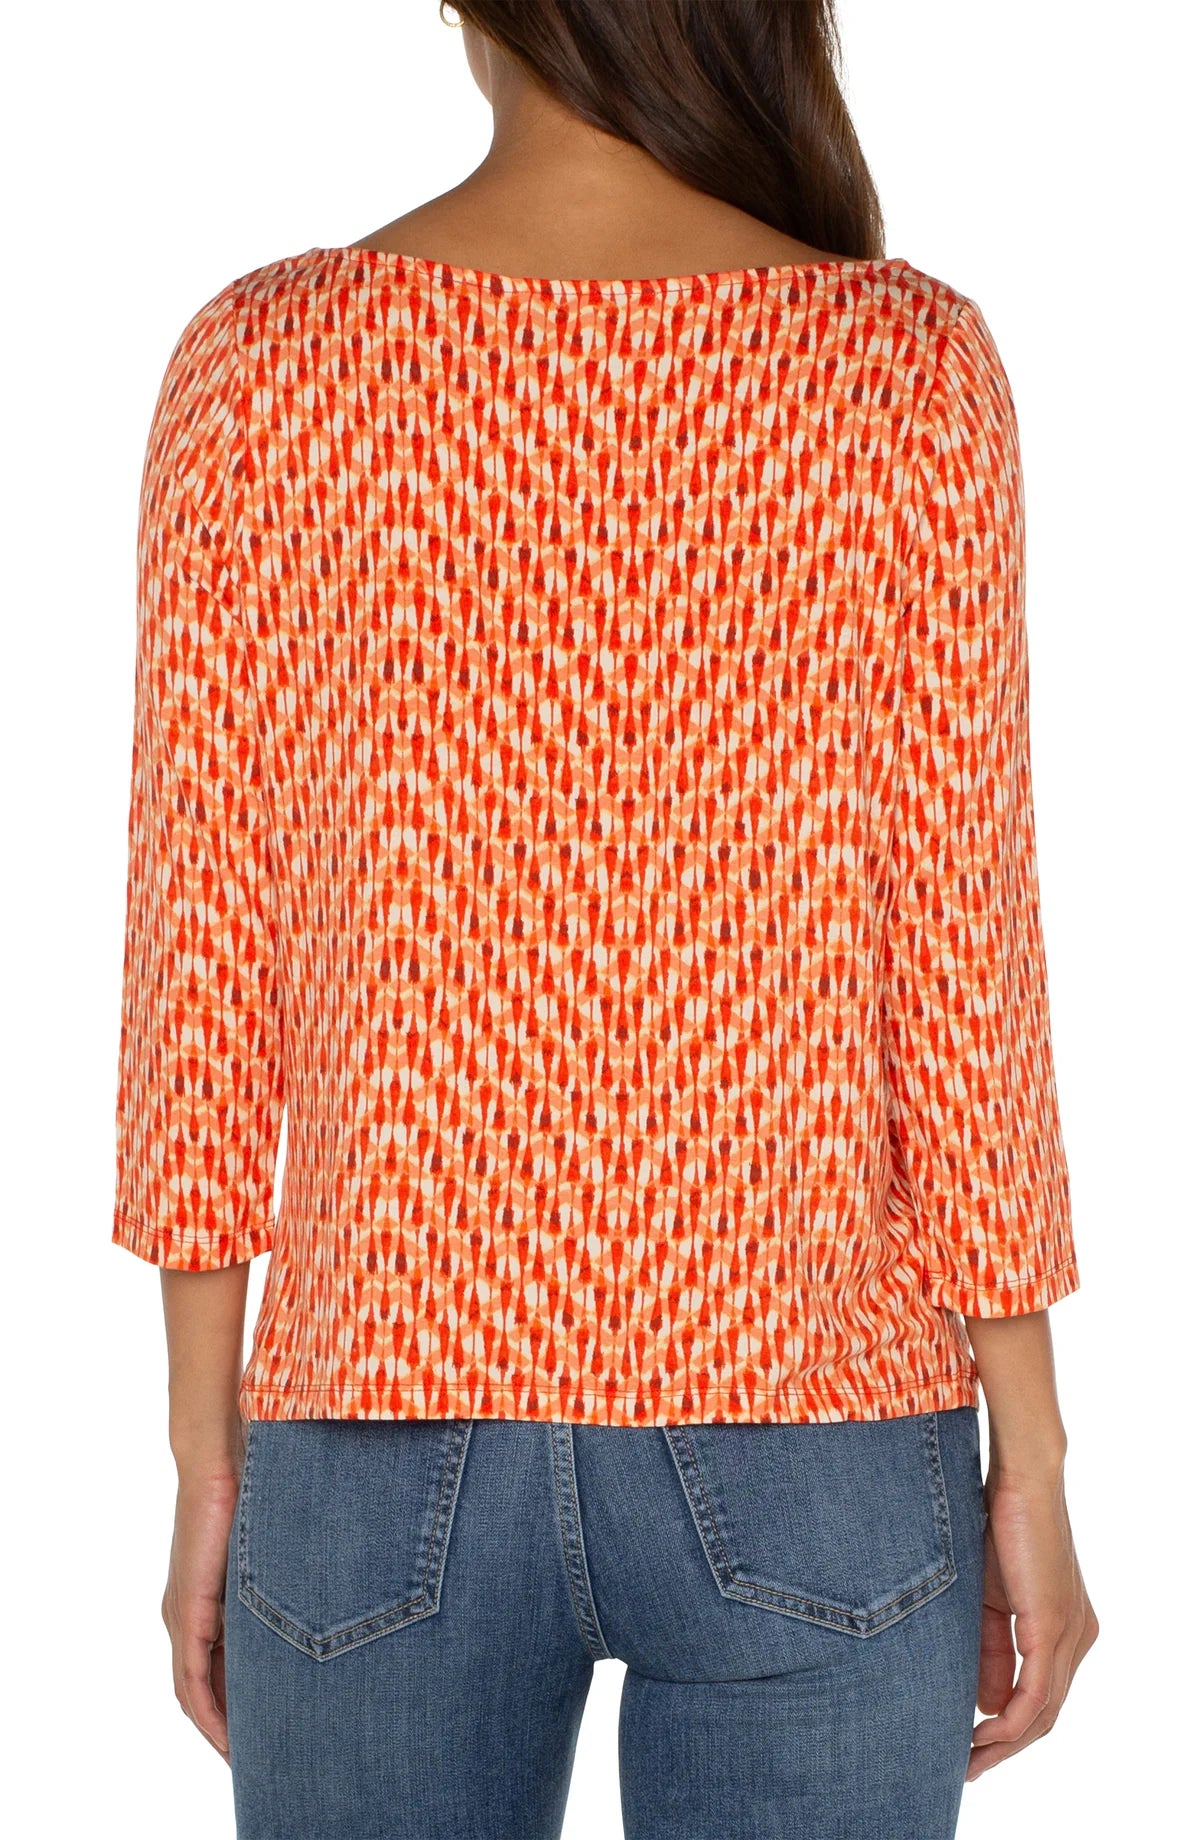 Cowl Neck Top with 3/4 Length Sleeves - Coral Blaze Ikat